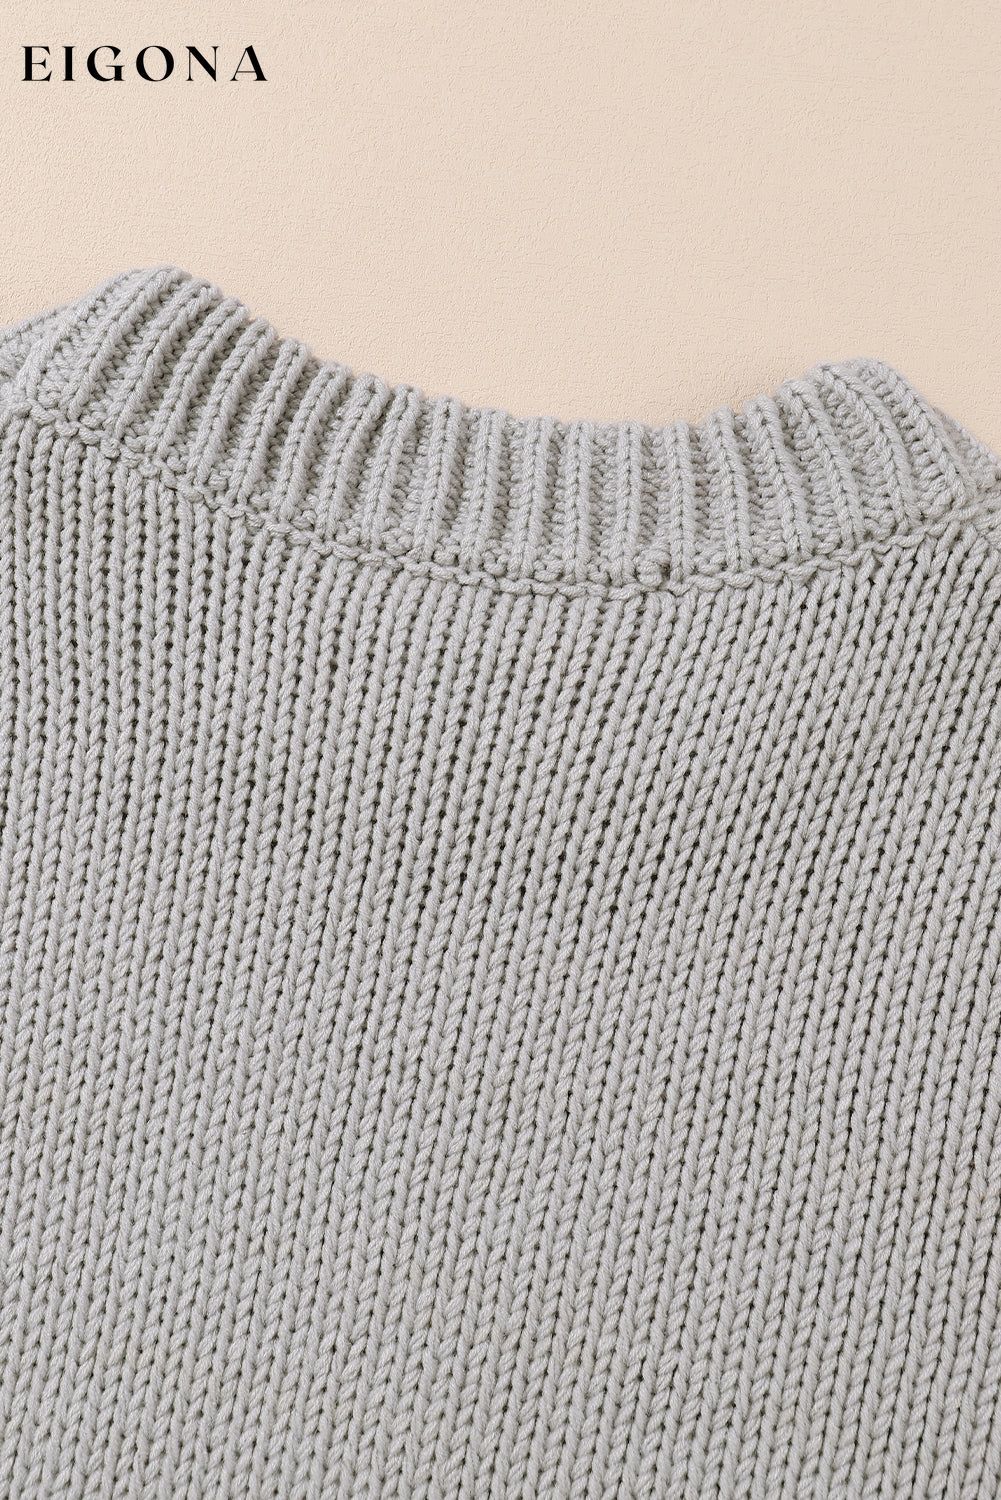 Light Grey Knit Turtle Neck Drop Shoulder Sweater All In Stock clothes EDM Monthly Recomend grey sweaters Hot picks Occasion Daily Print Solid Color Season Winter Style Casual sweater sweaters